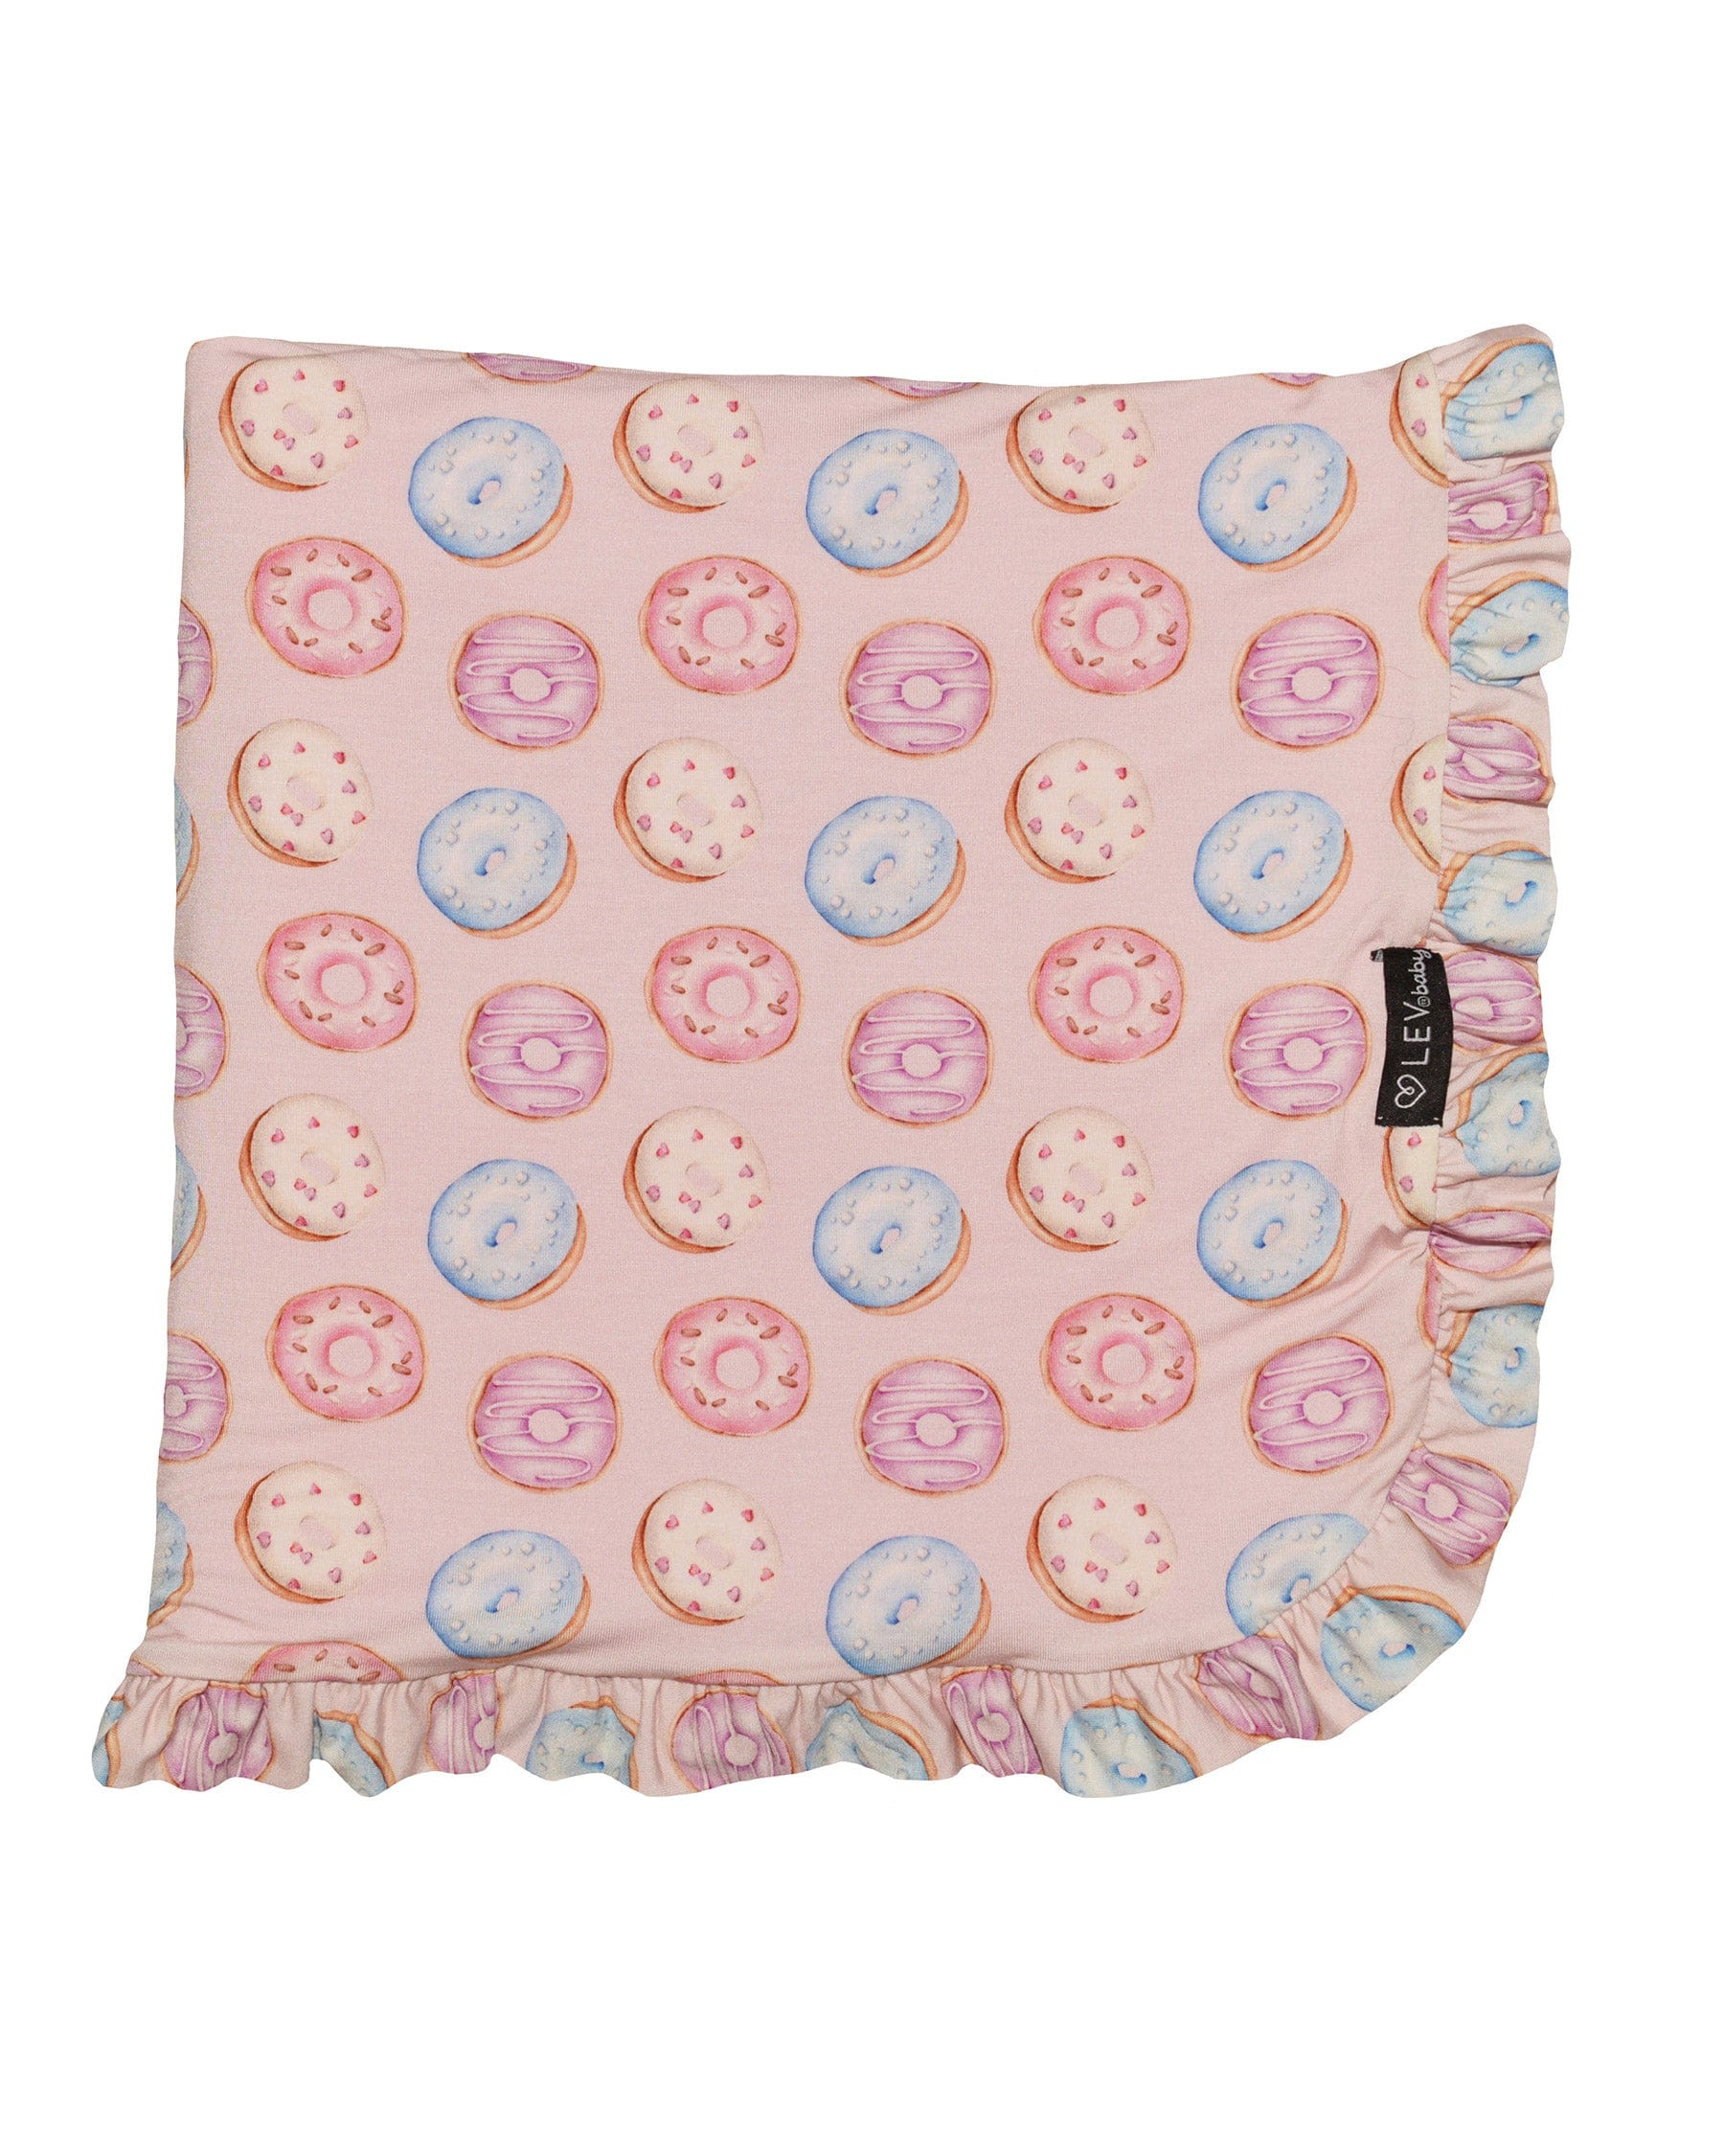 Lev Baby Ruffled Blanket in Della Collection